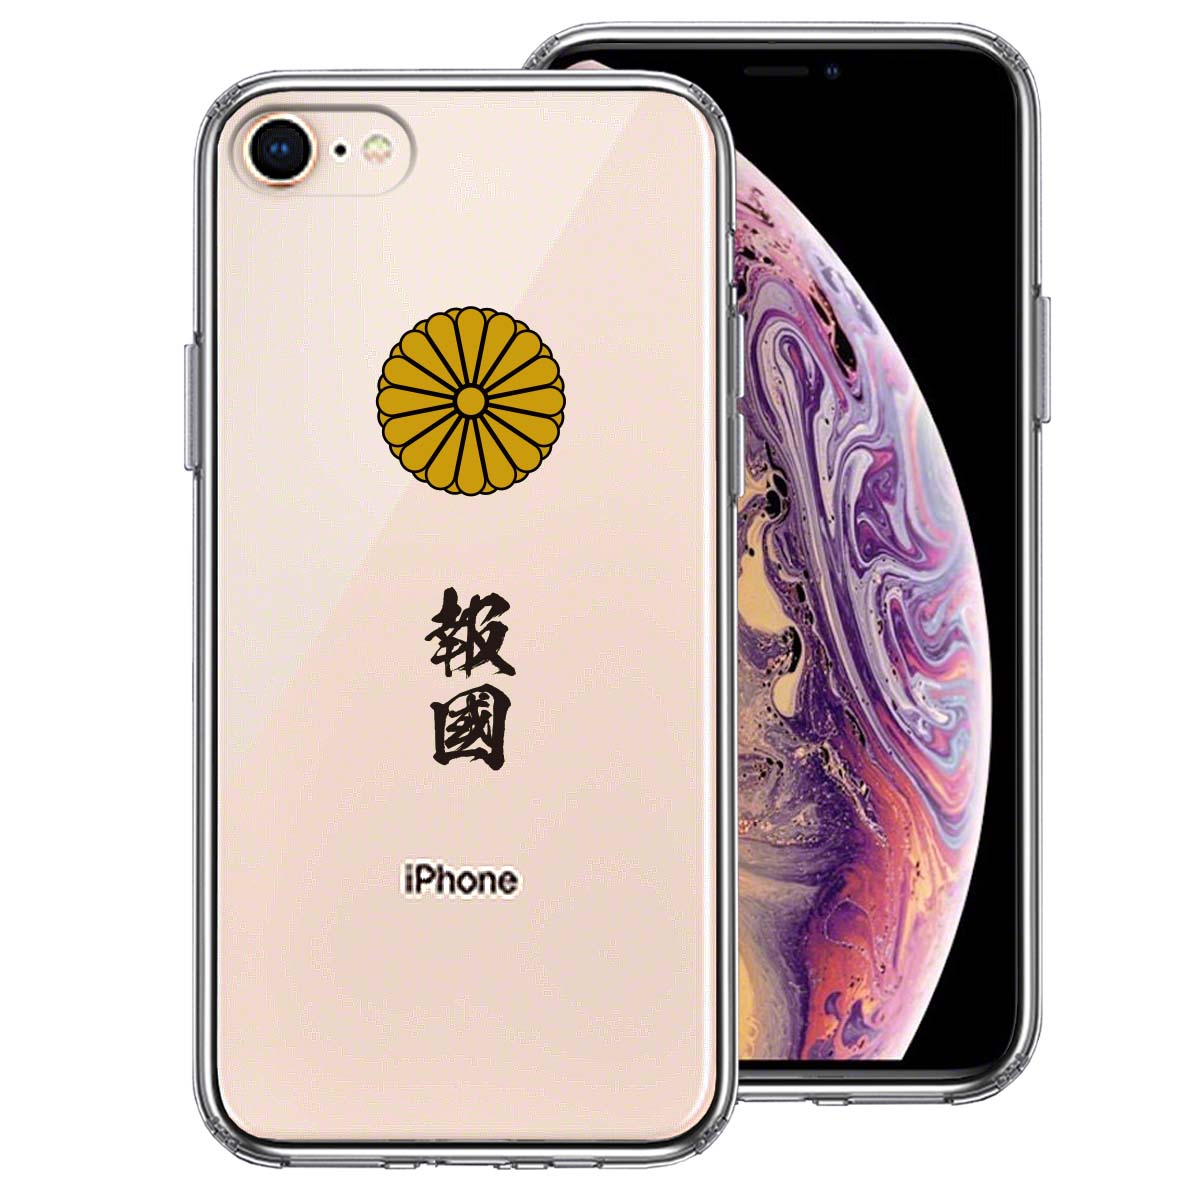 iPhone7 iPhone8 兼用 側面ソフト 背面ハード ハイブリッド クリア ケース 菊花紋 十六花弁 報国